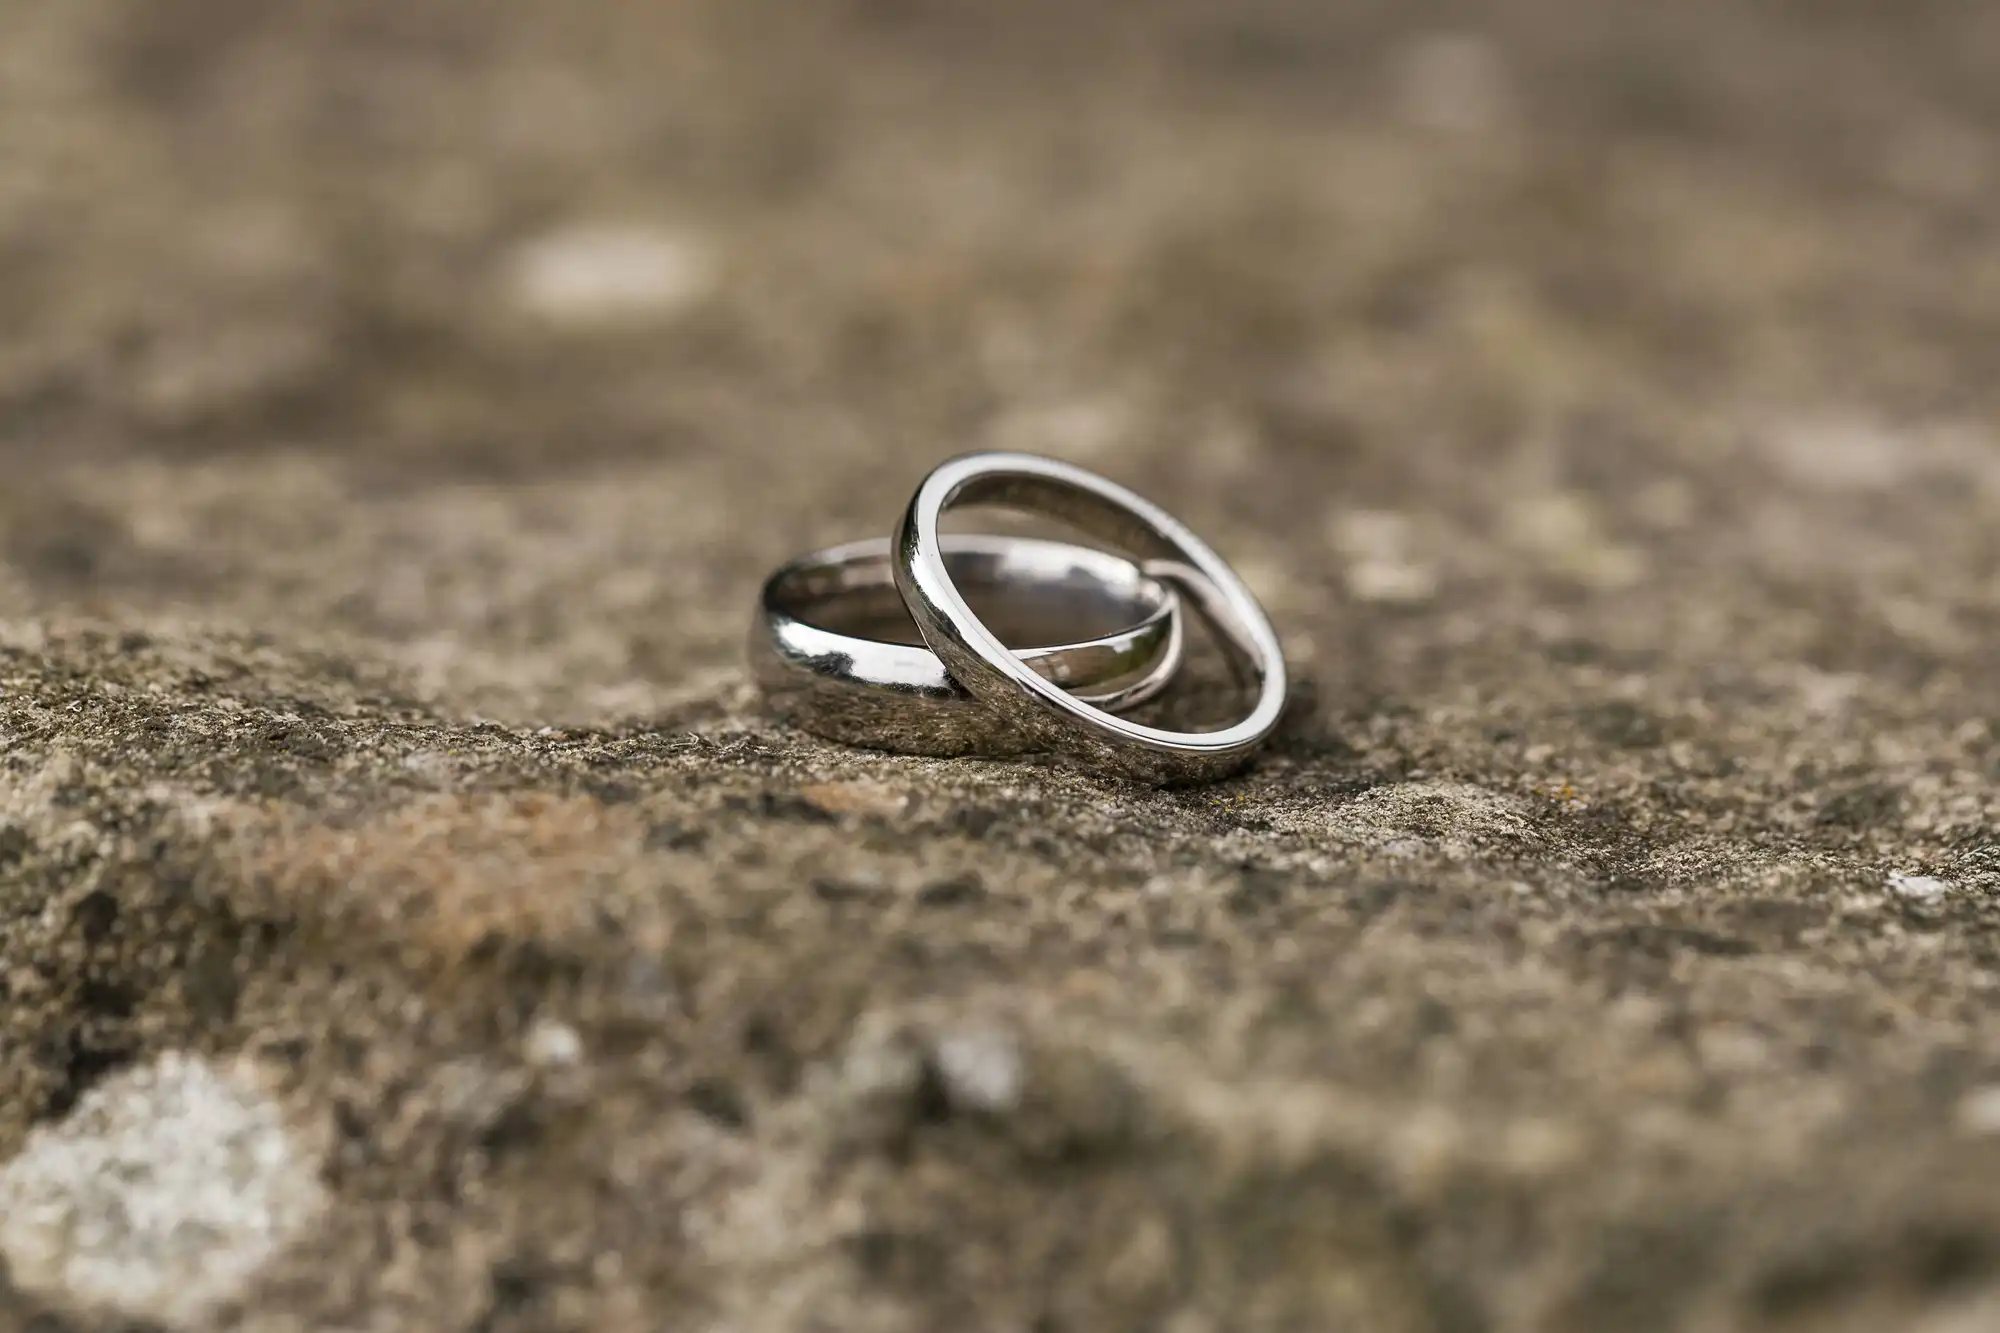 Two silver wedding bands linked together, resting on a textured stone surface.